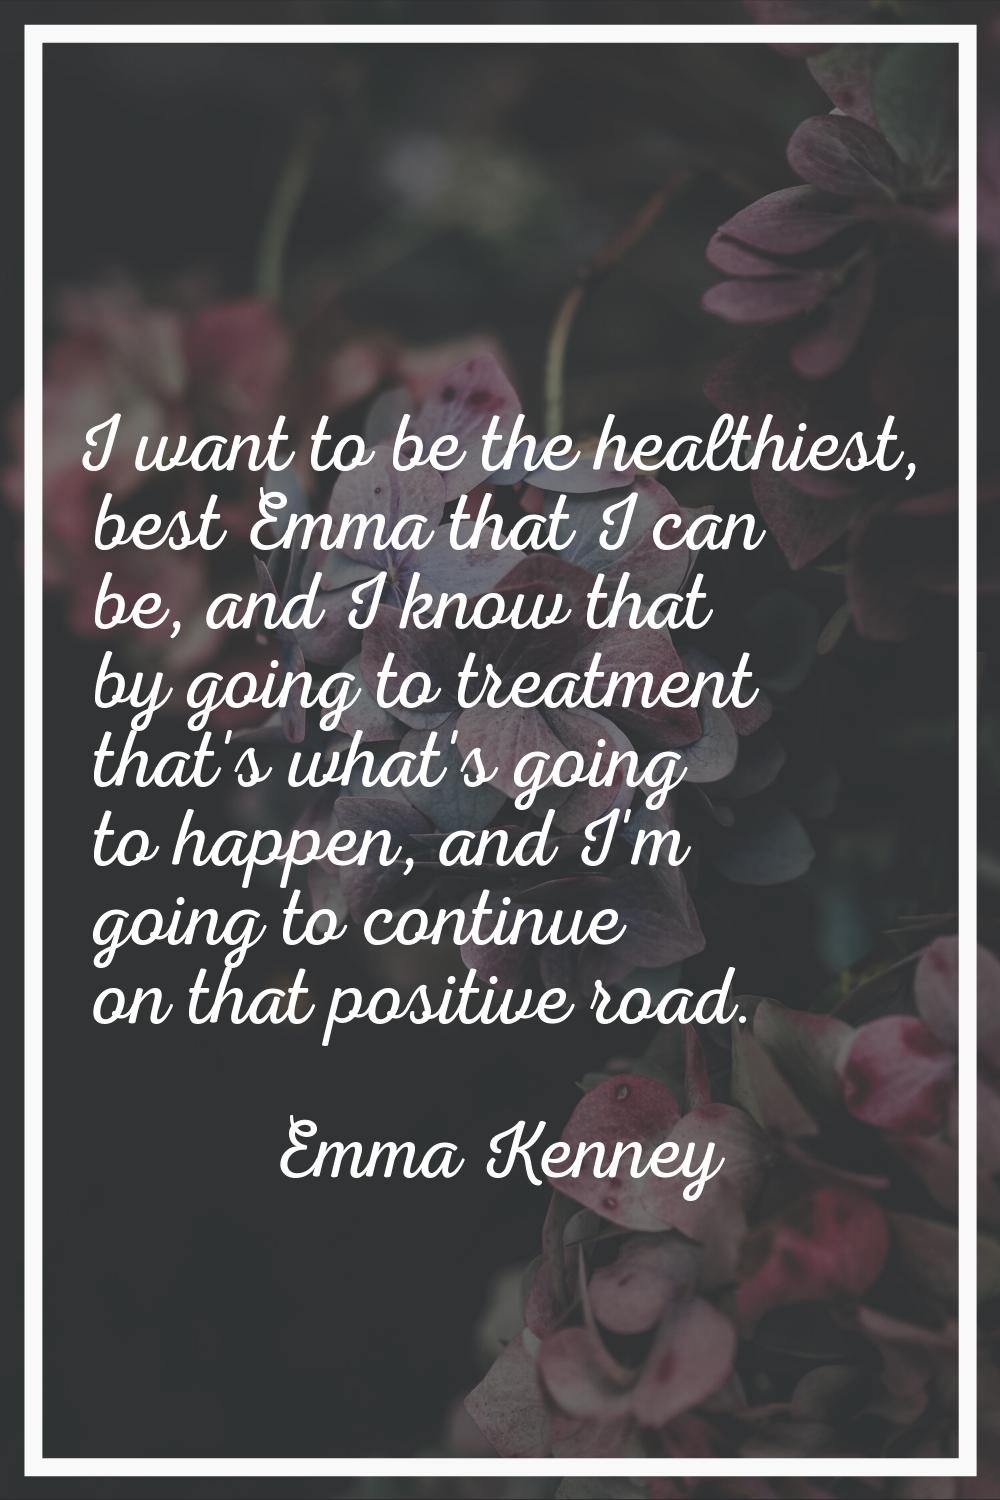 I want to be the healthiest, best Emma that I can be, and I know that by going to treatment that's 